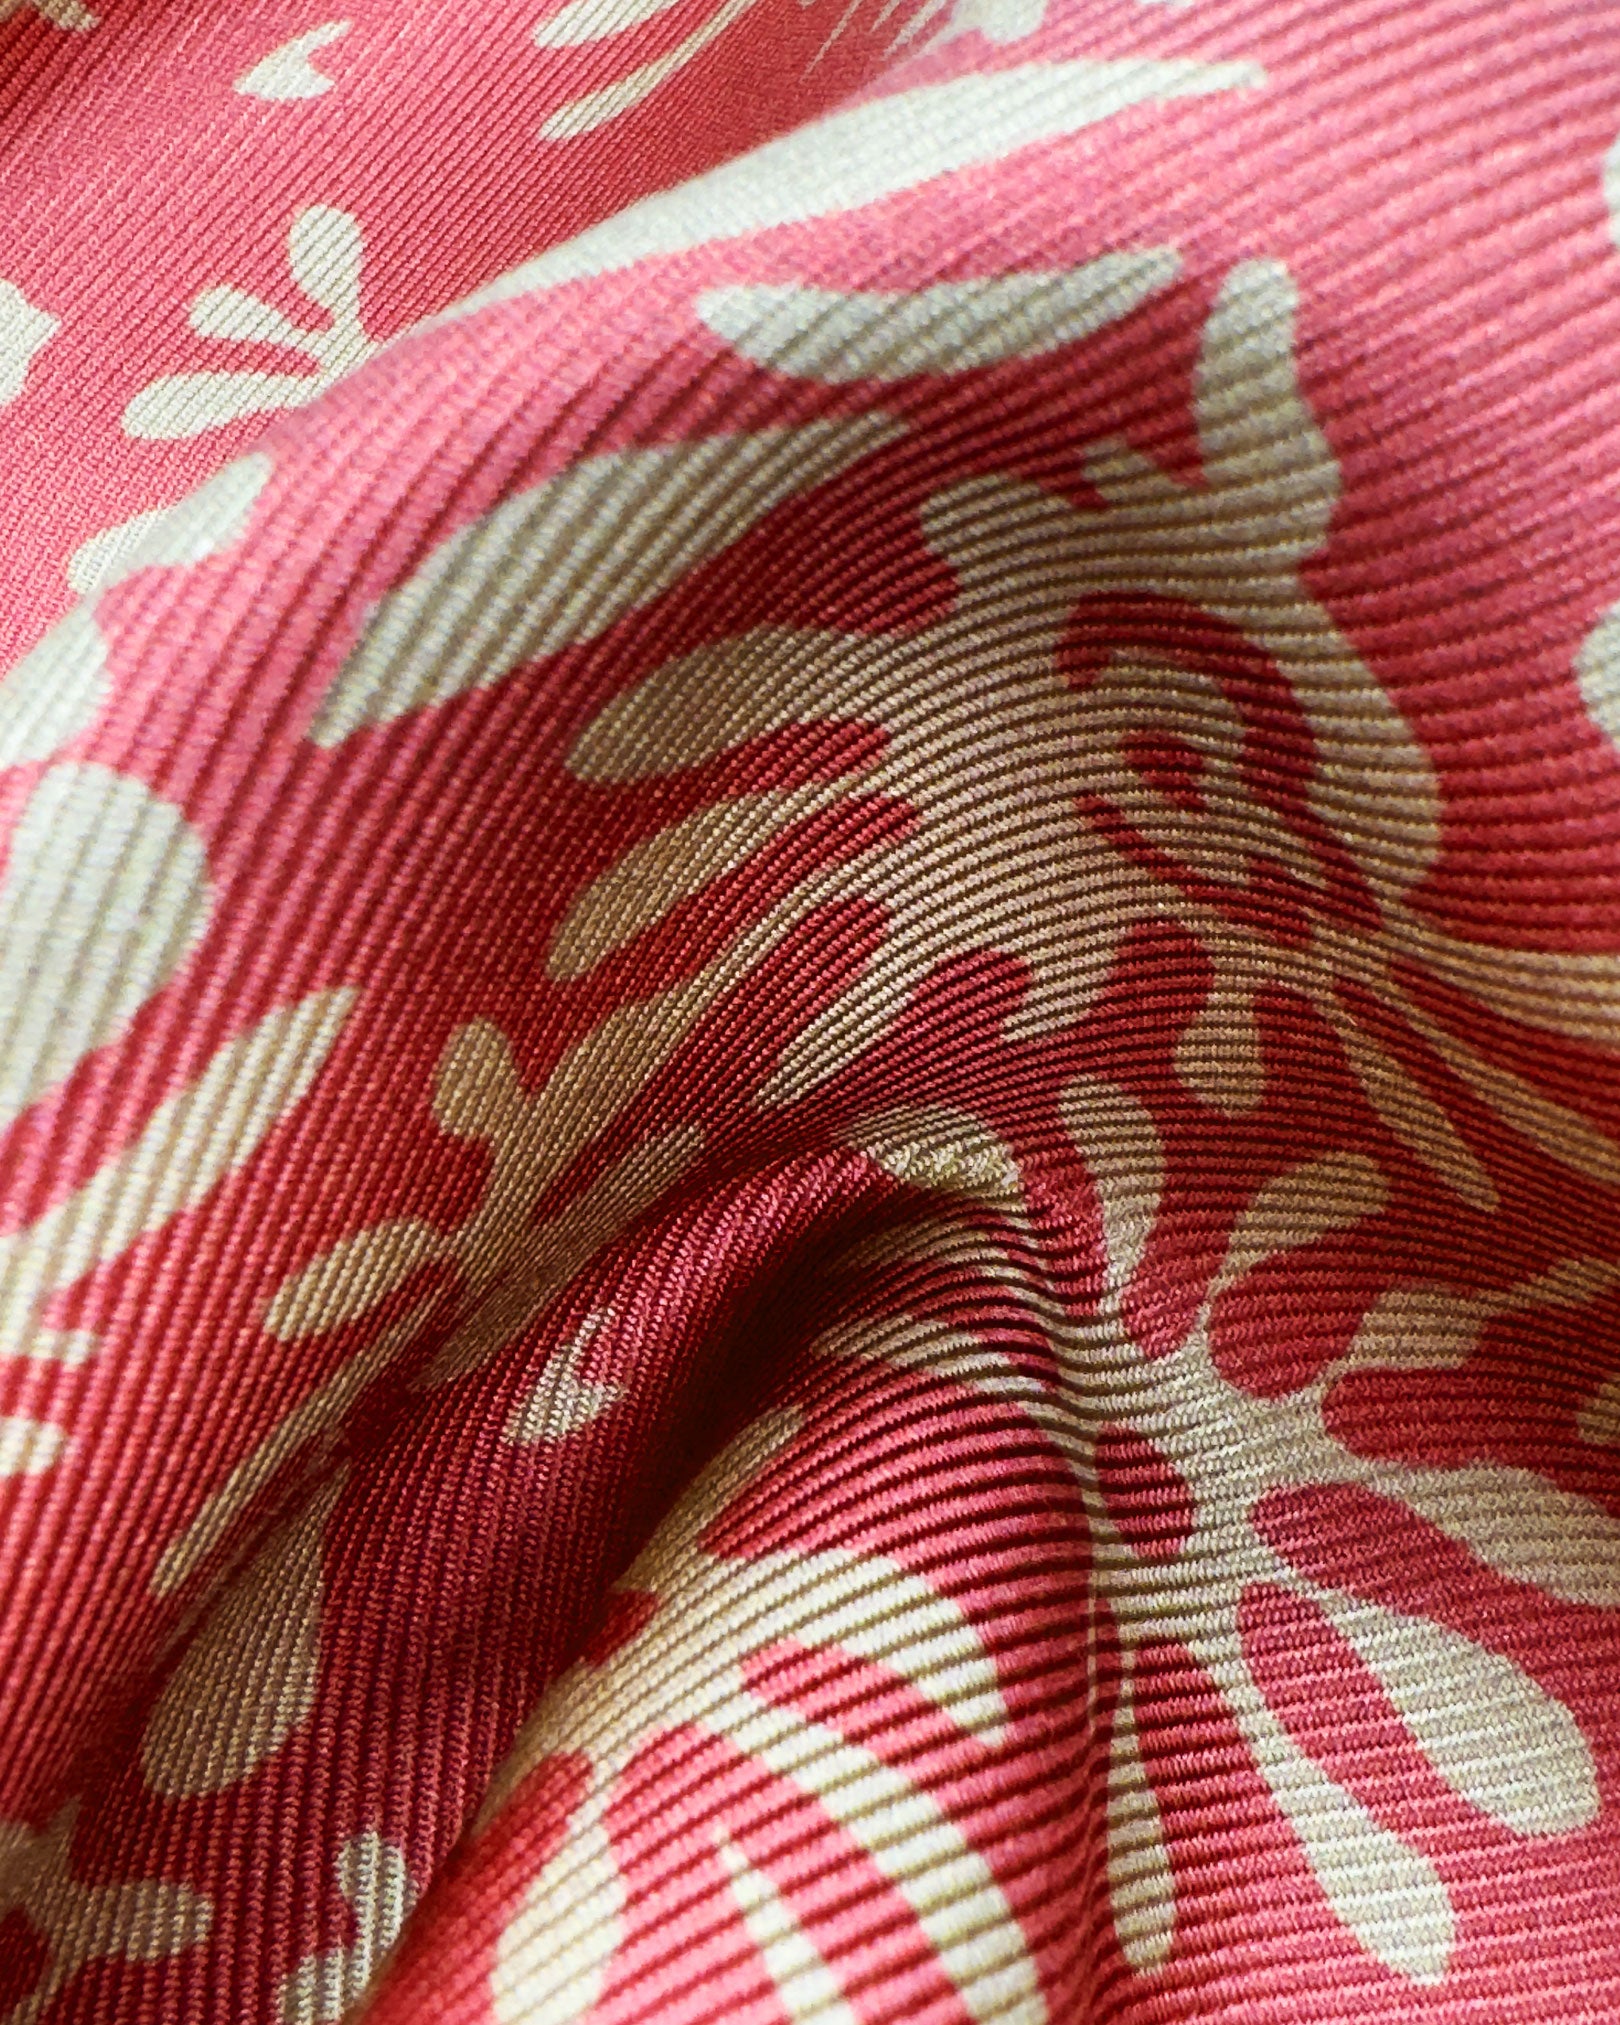 A ruffled close-up of the 'Stonehenge' pocket square, presenting a closer view of the floral-inspired patterns against the attractive lustre of the deadstock silk material. 